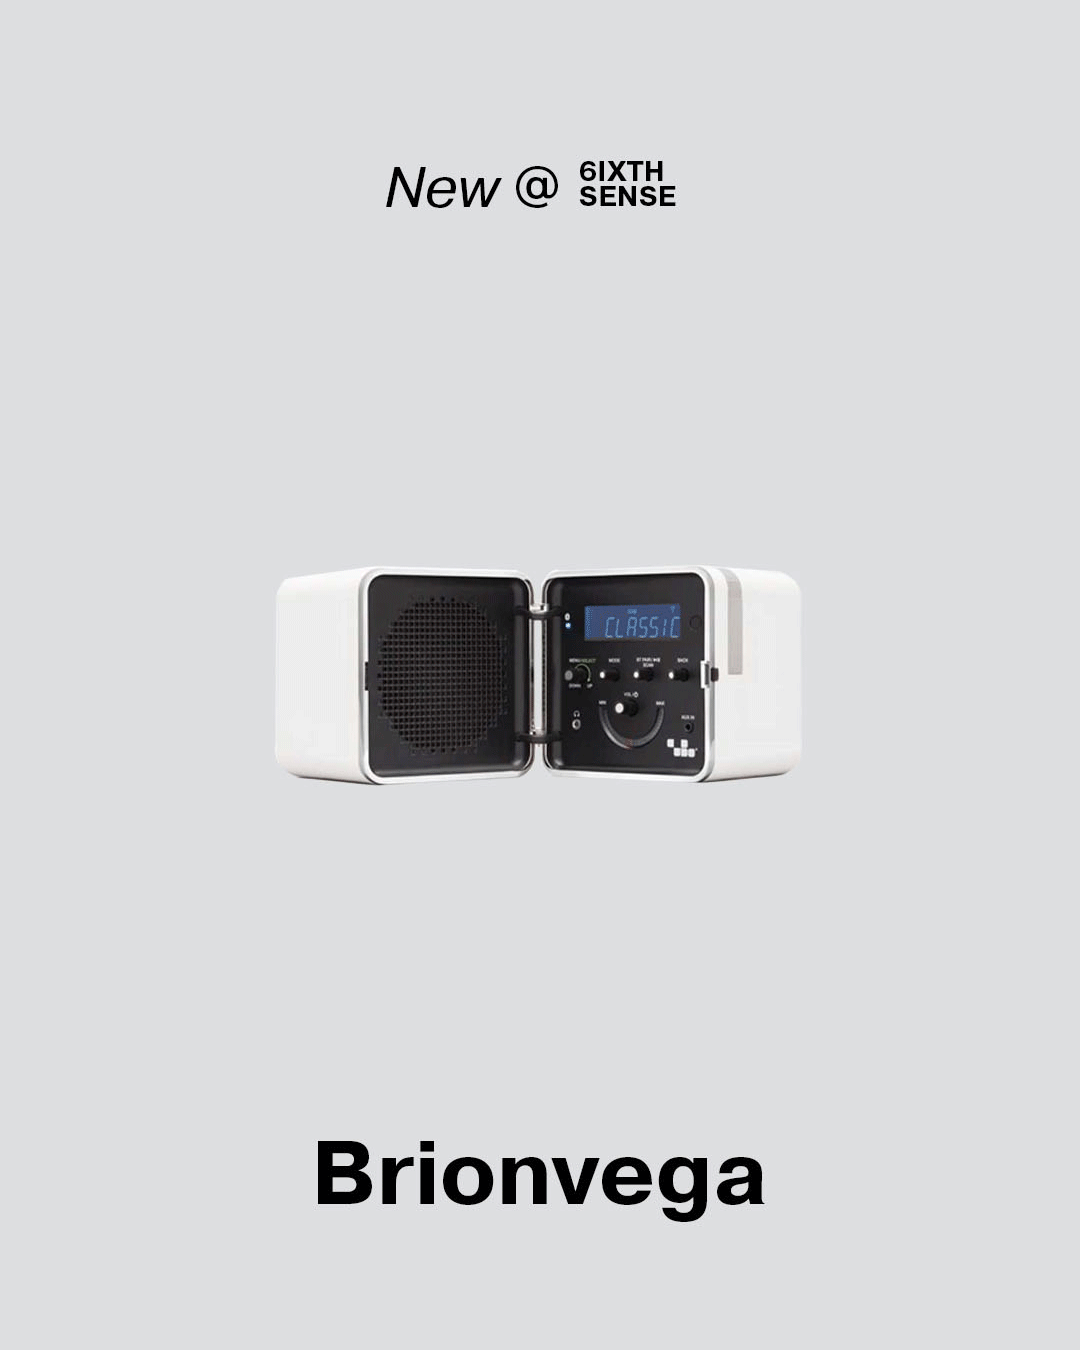 A timeless object: The Brionvega Audio System